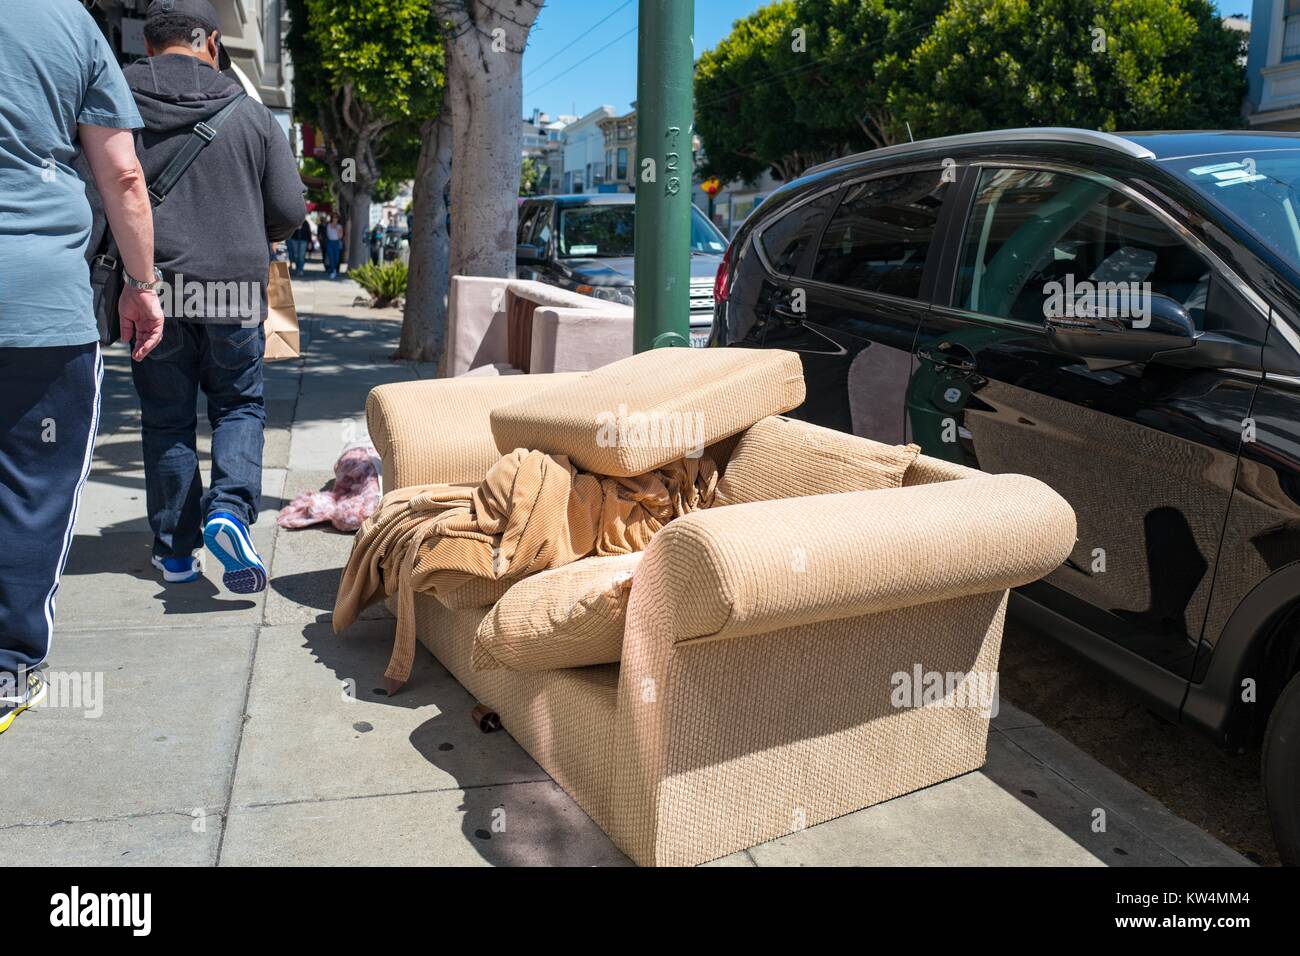 Residents walk past a beige couch which has been abandoned on the side of the road in the Cow Hollow neighborhood of San Francisco, California, August 28, 2016. Stock Photo